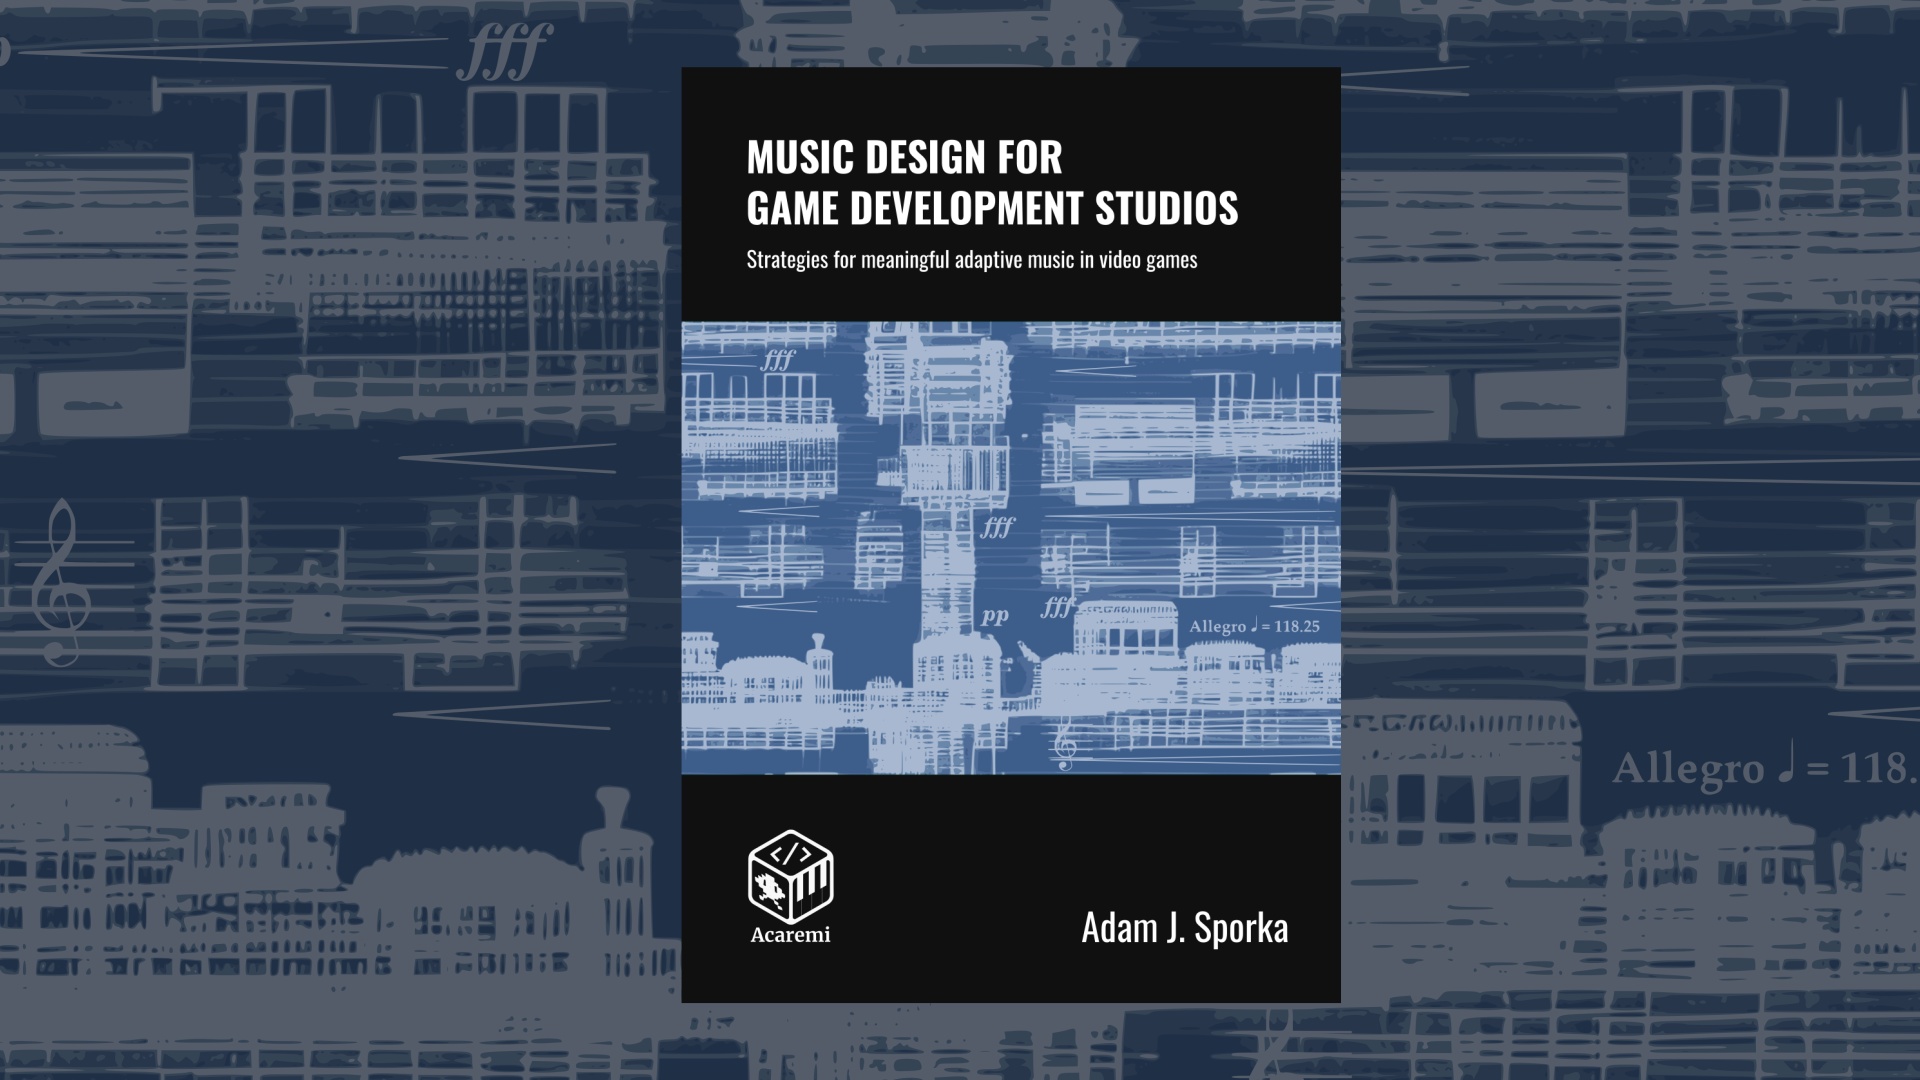 Music Design for Game Development Studios. Strategies for meaningful adaptive music in video games